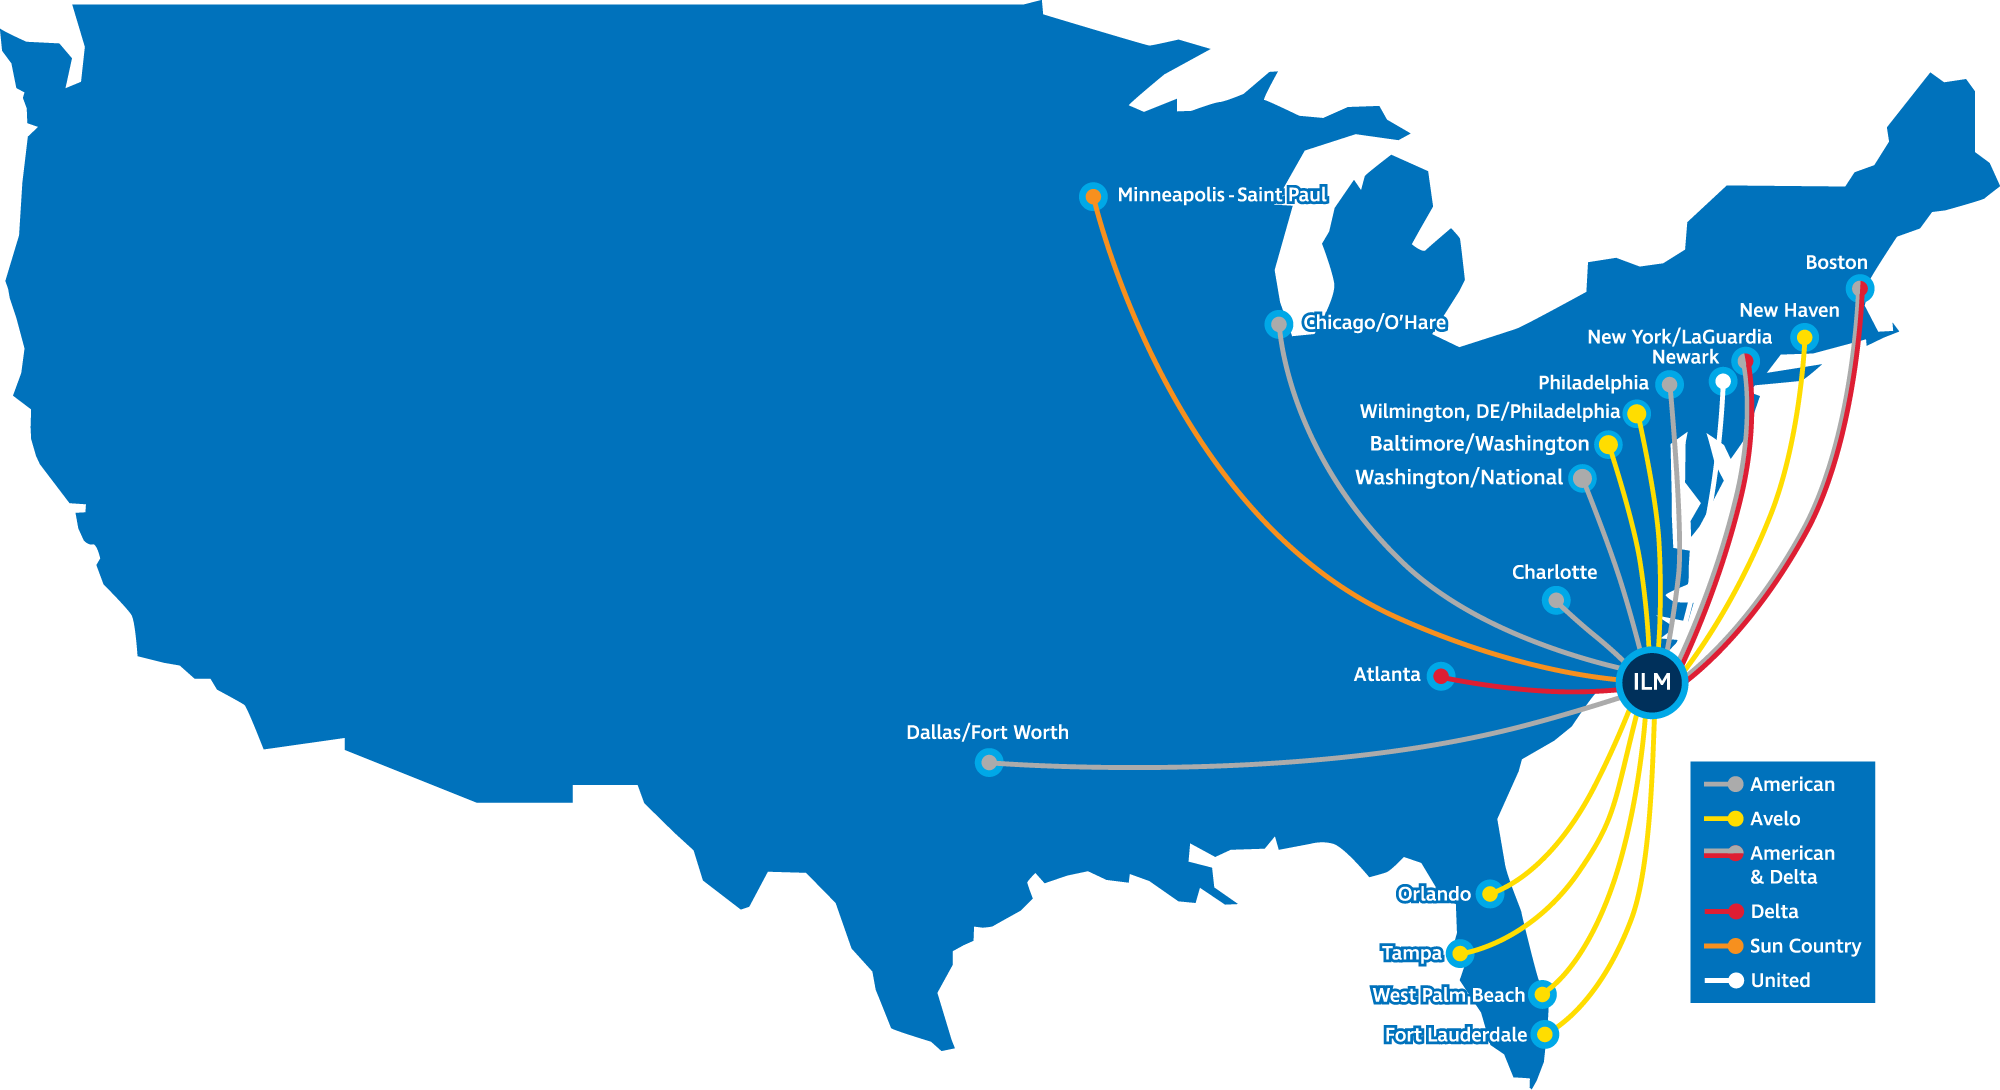 Map of United States with nonstop flight destinations